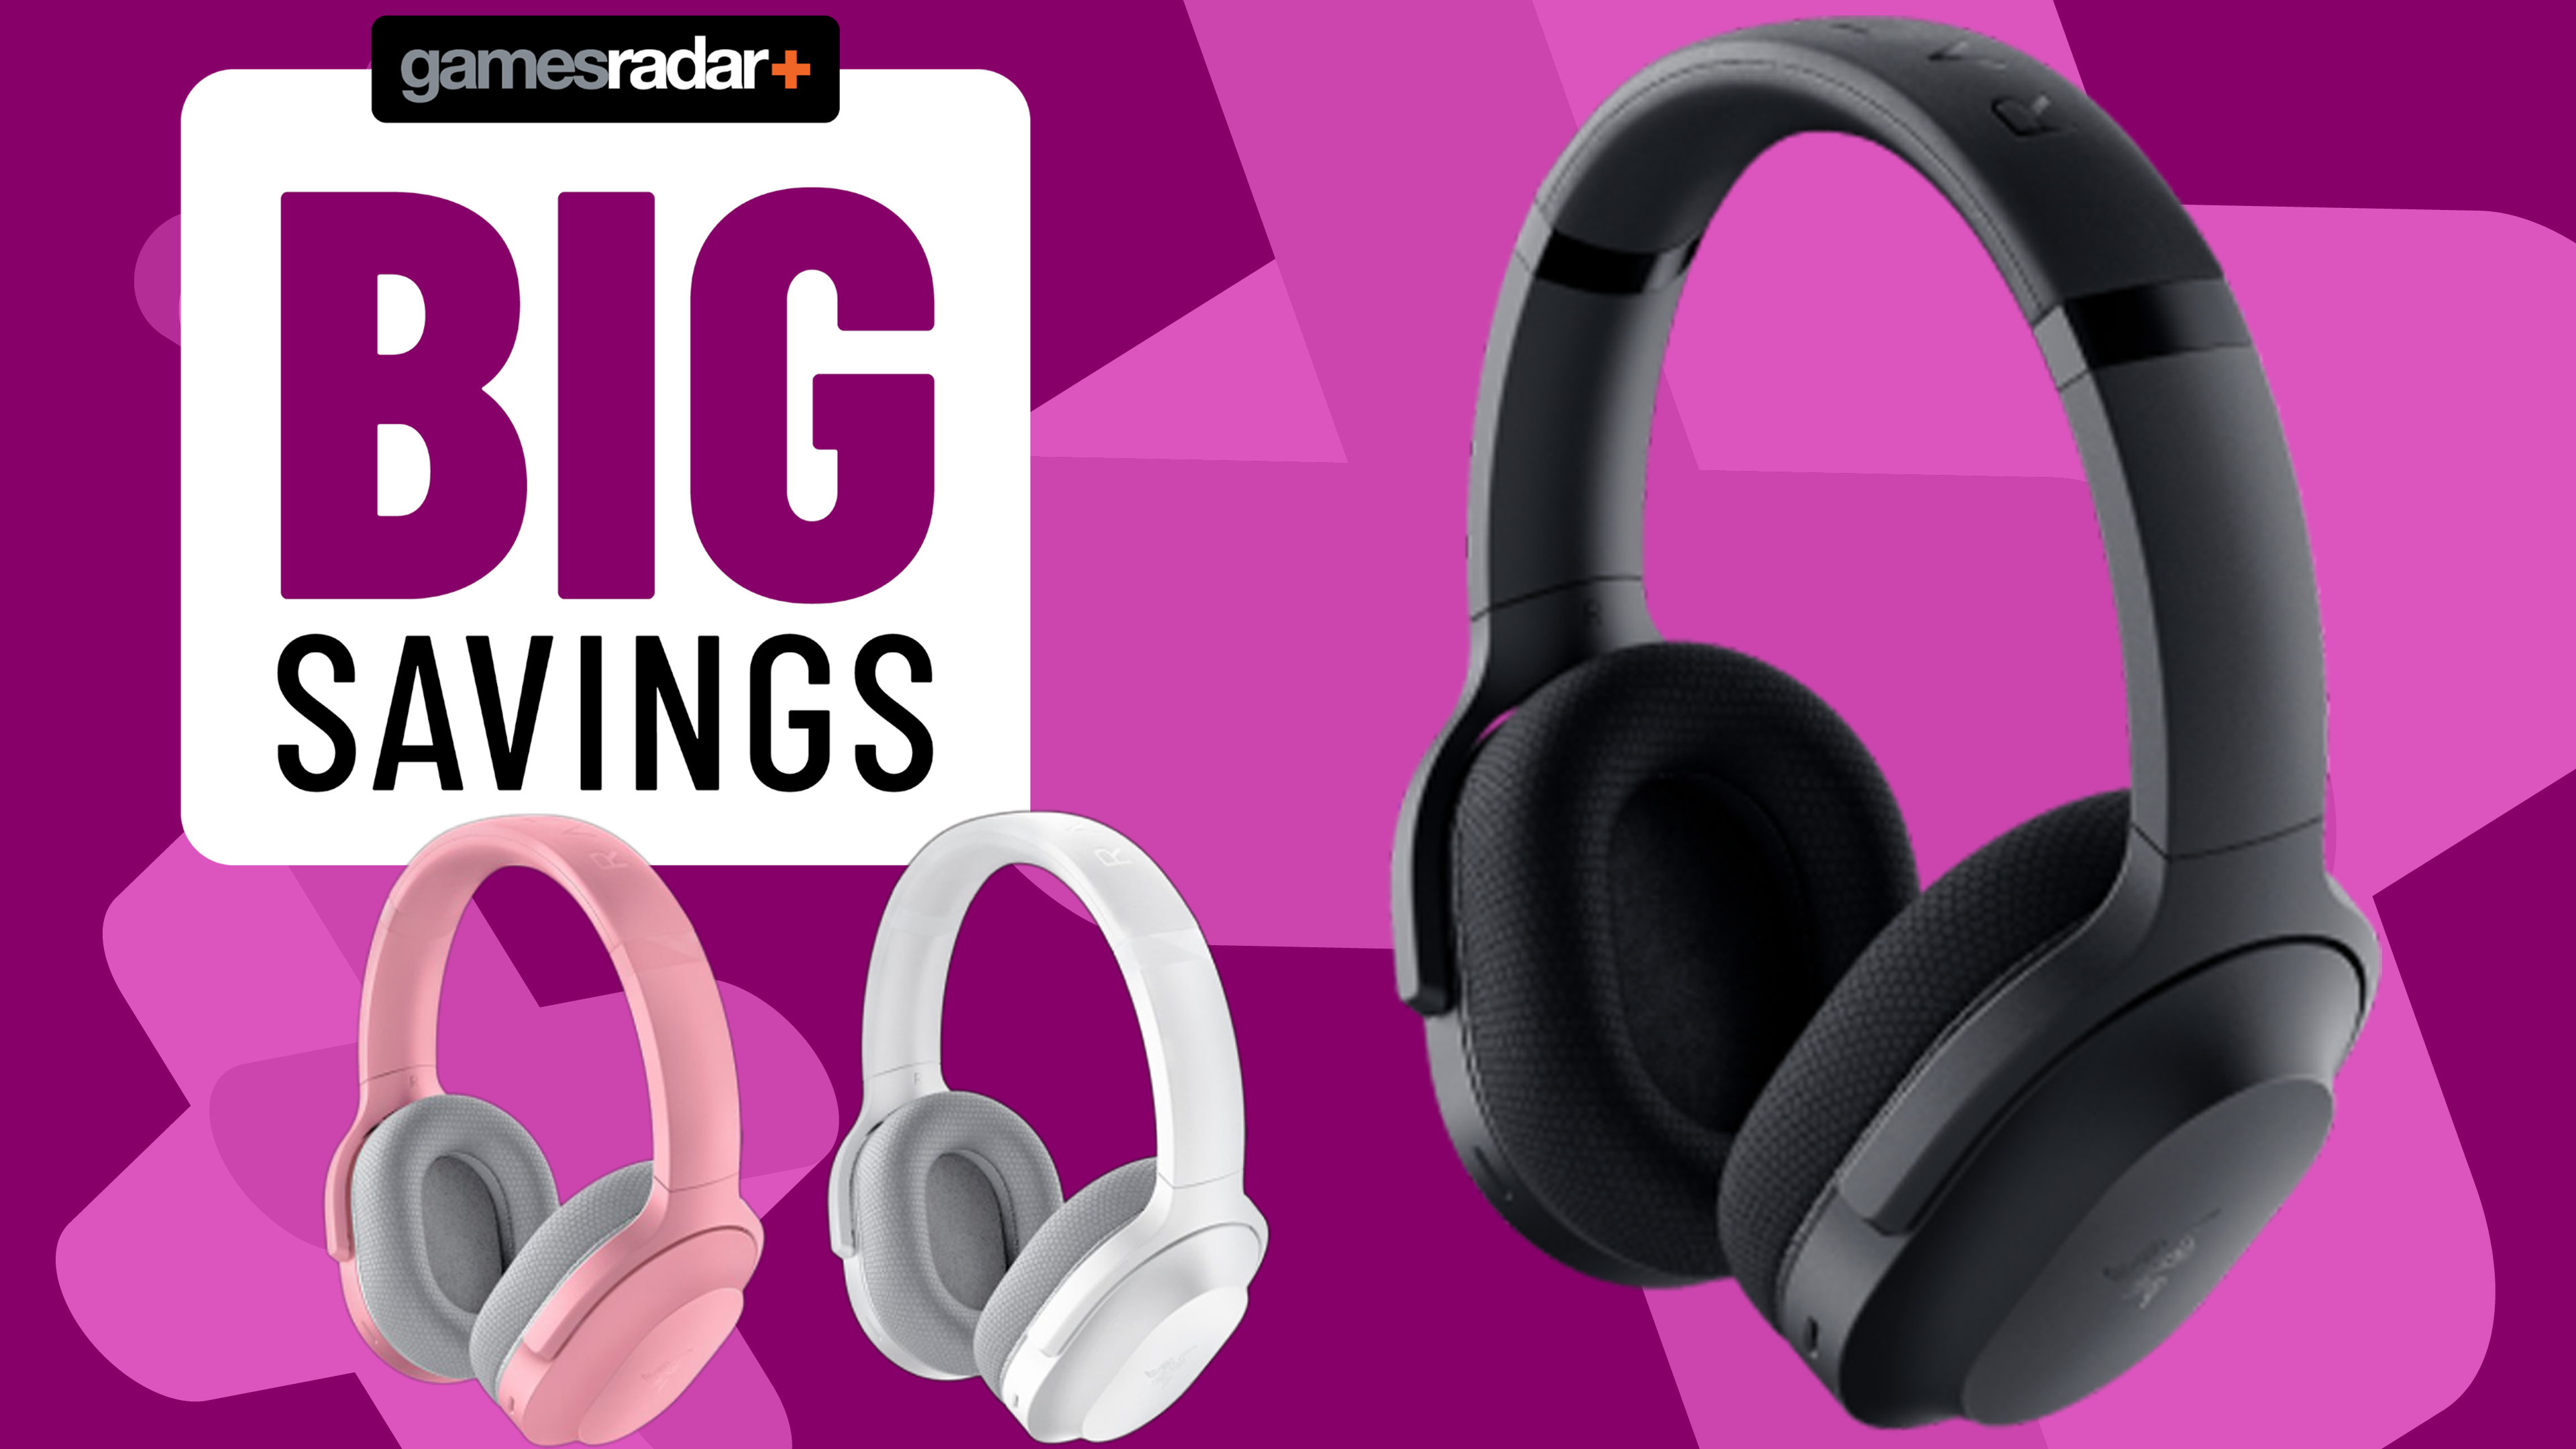 Razer gaming accessories are up to 50% off at